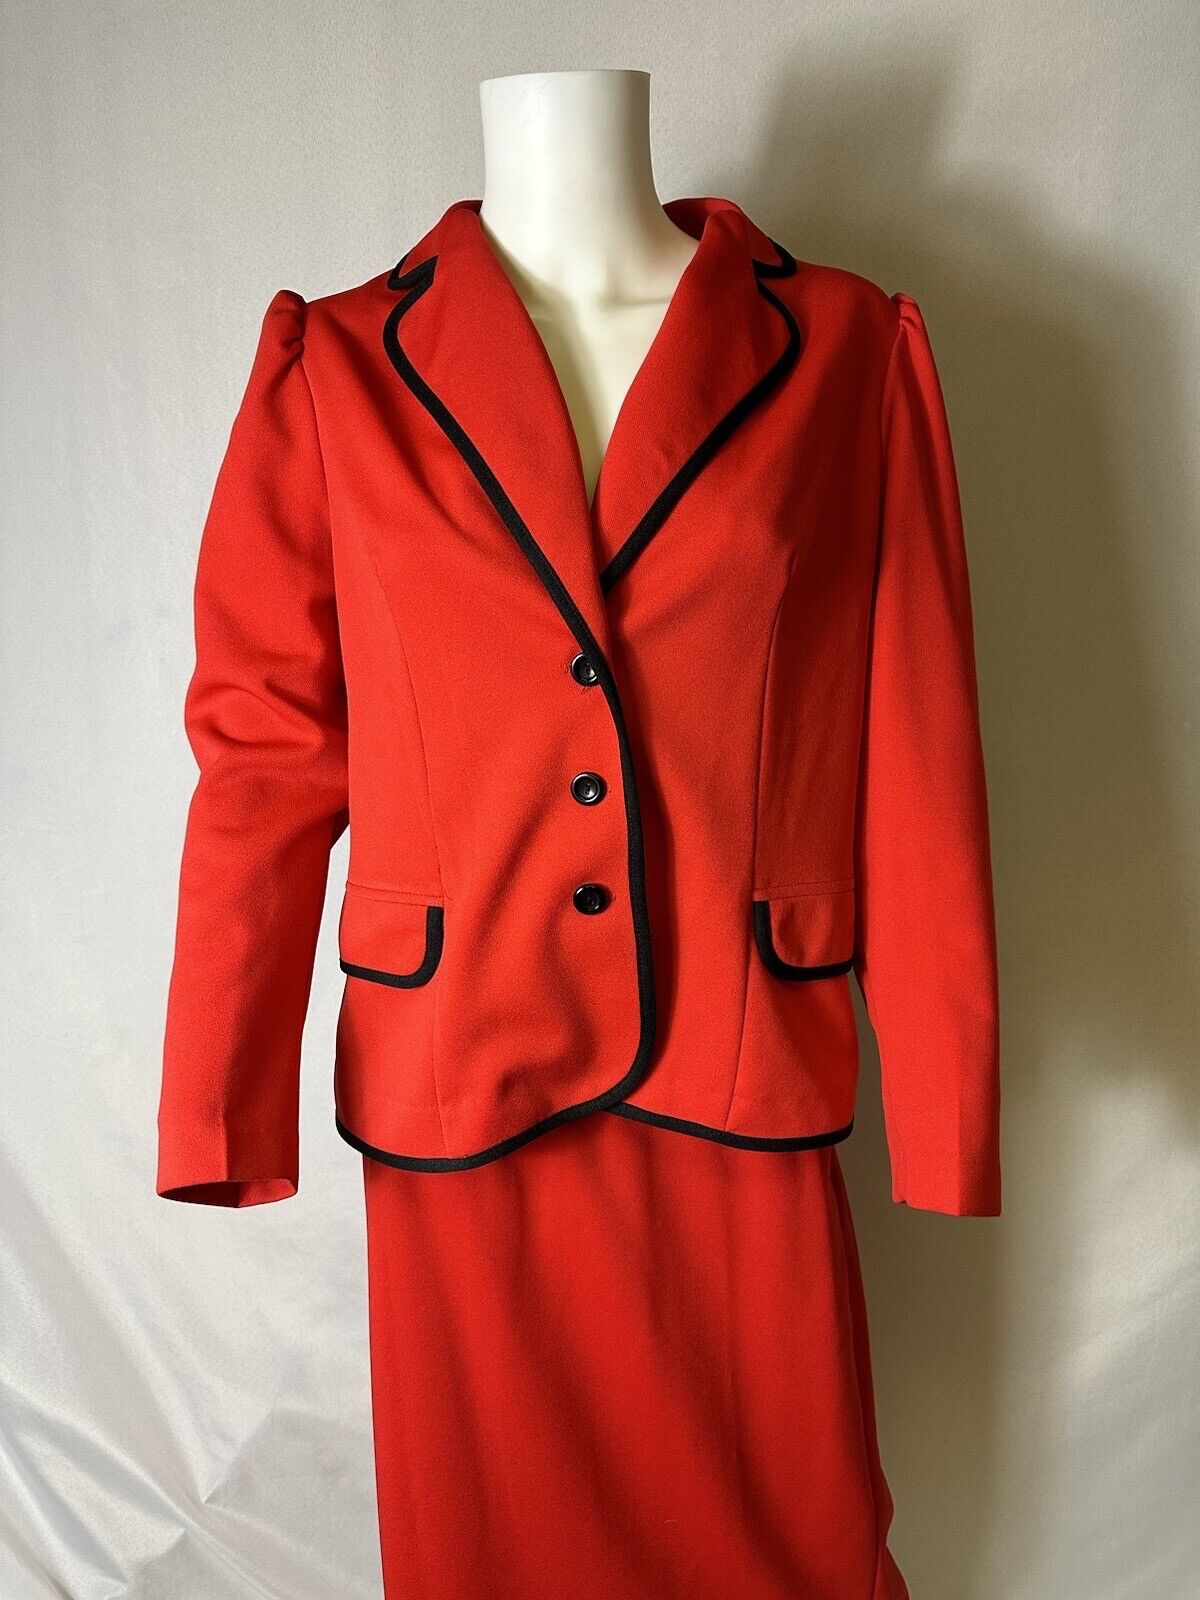 Vintage Marty Gutmacher Size 12 Red Skirt Suit - image 2